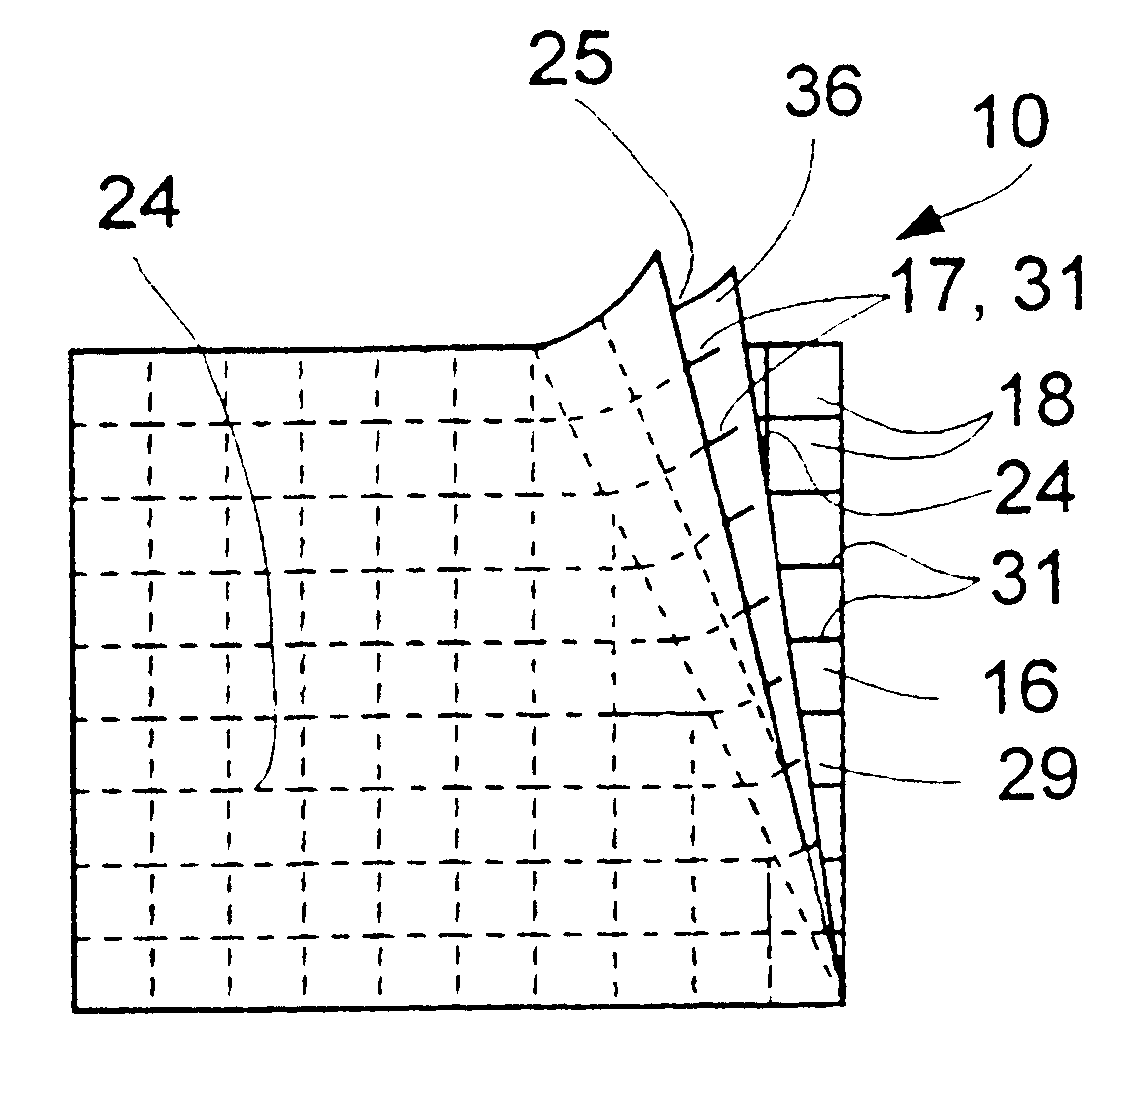 Sealing sheet assembly for construction surfaces and methods of making and applying same